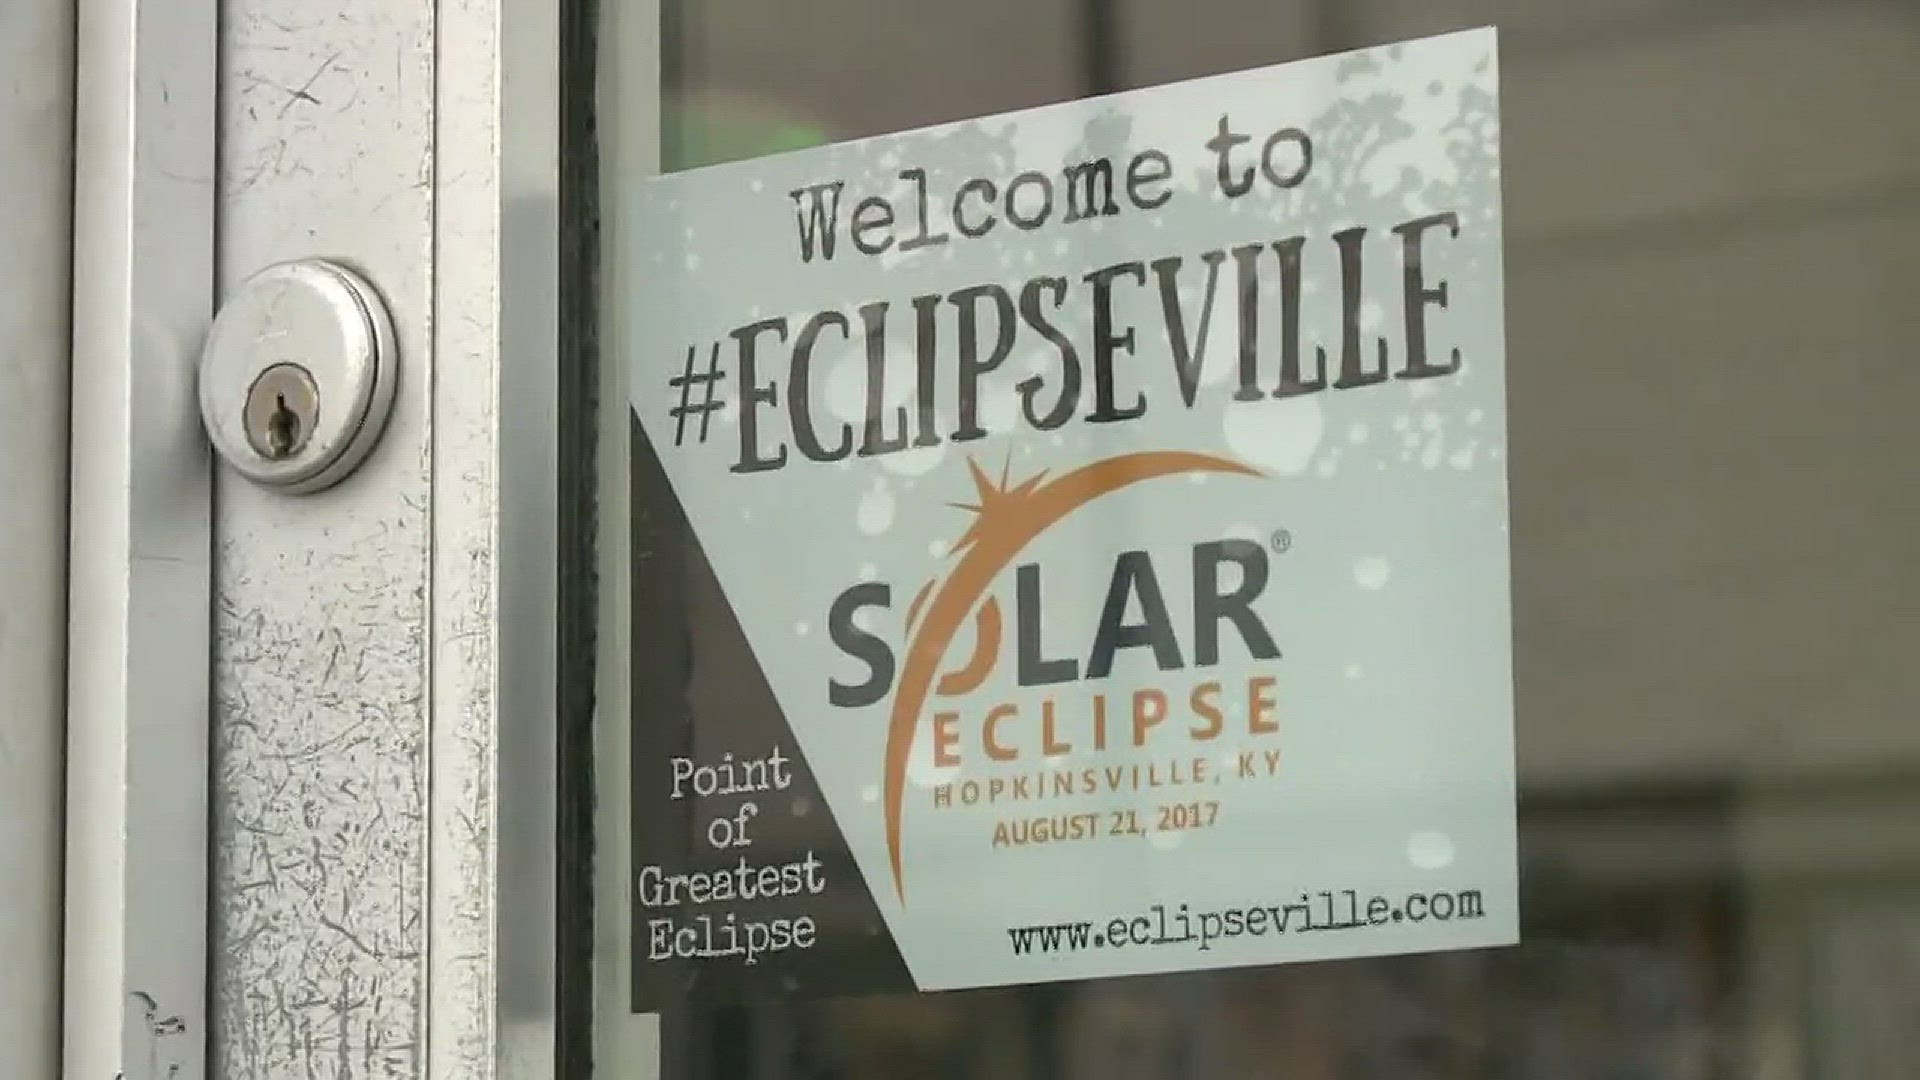 A Kentucky town is bracing for a population boom thanks to an event some have described as winning the "cosmic lottery".